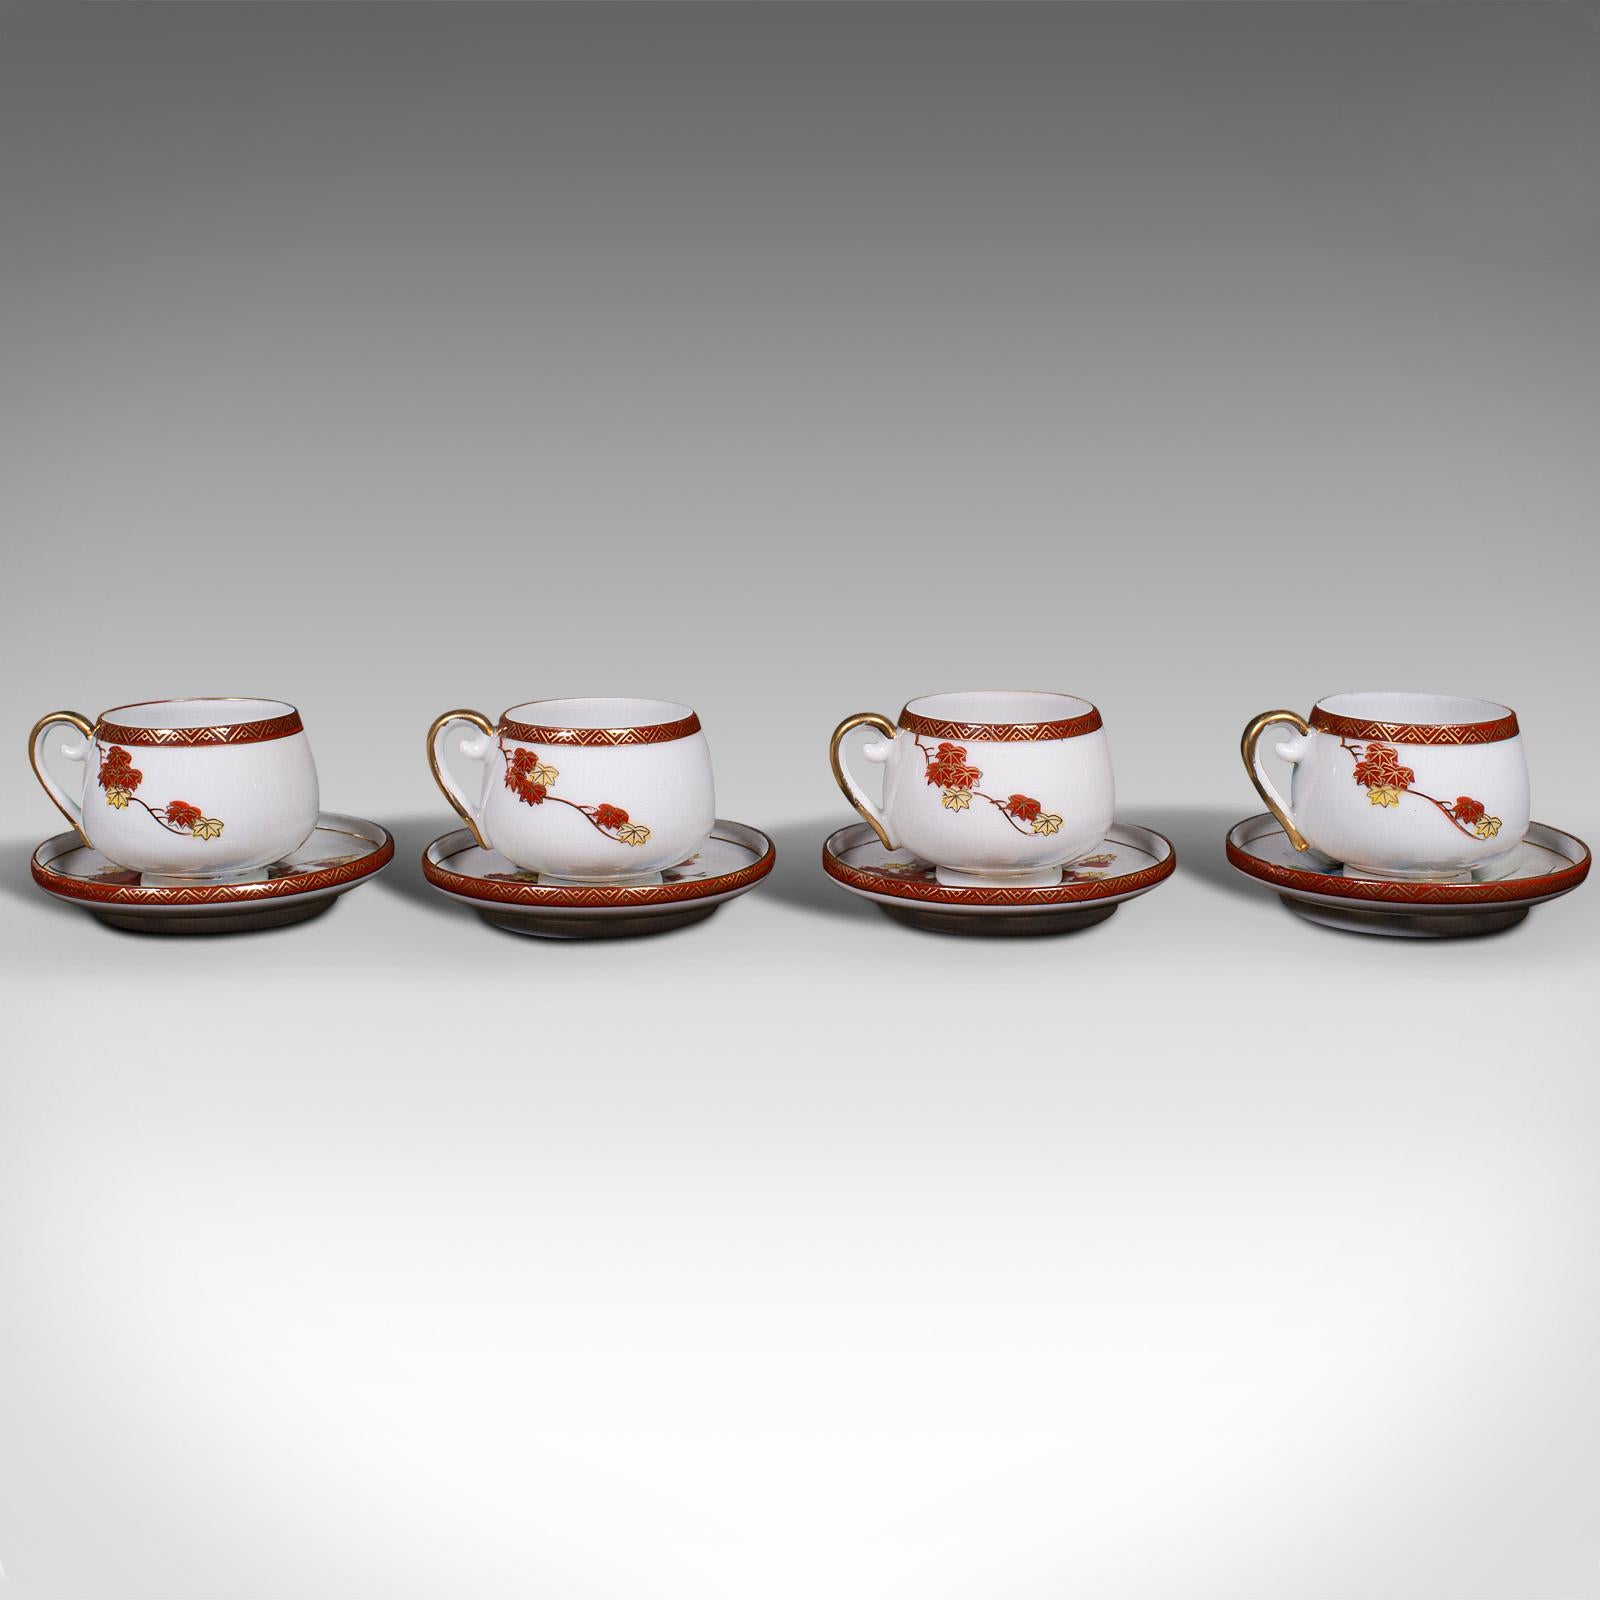 Vintage 4-person Tea Set, Japanese, Ceramic, Teapot, Cups, After Arita, Art Deco In Good Condition For Sale In Hele, Devon, GB